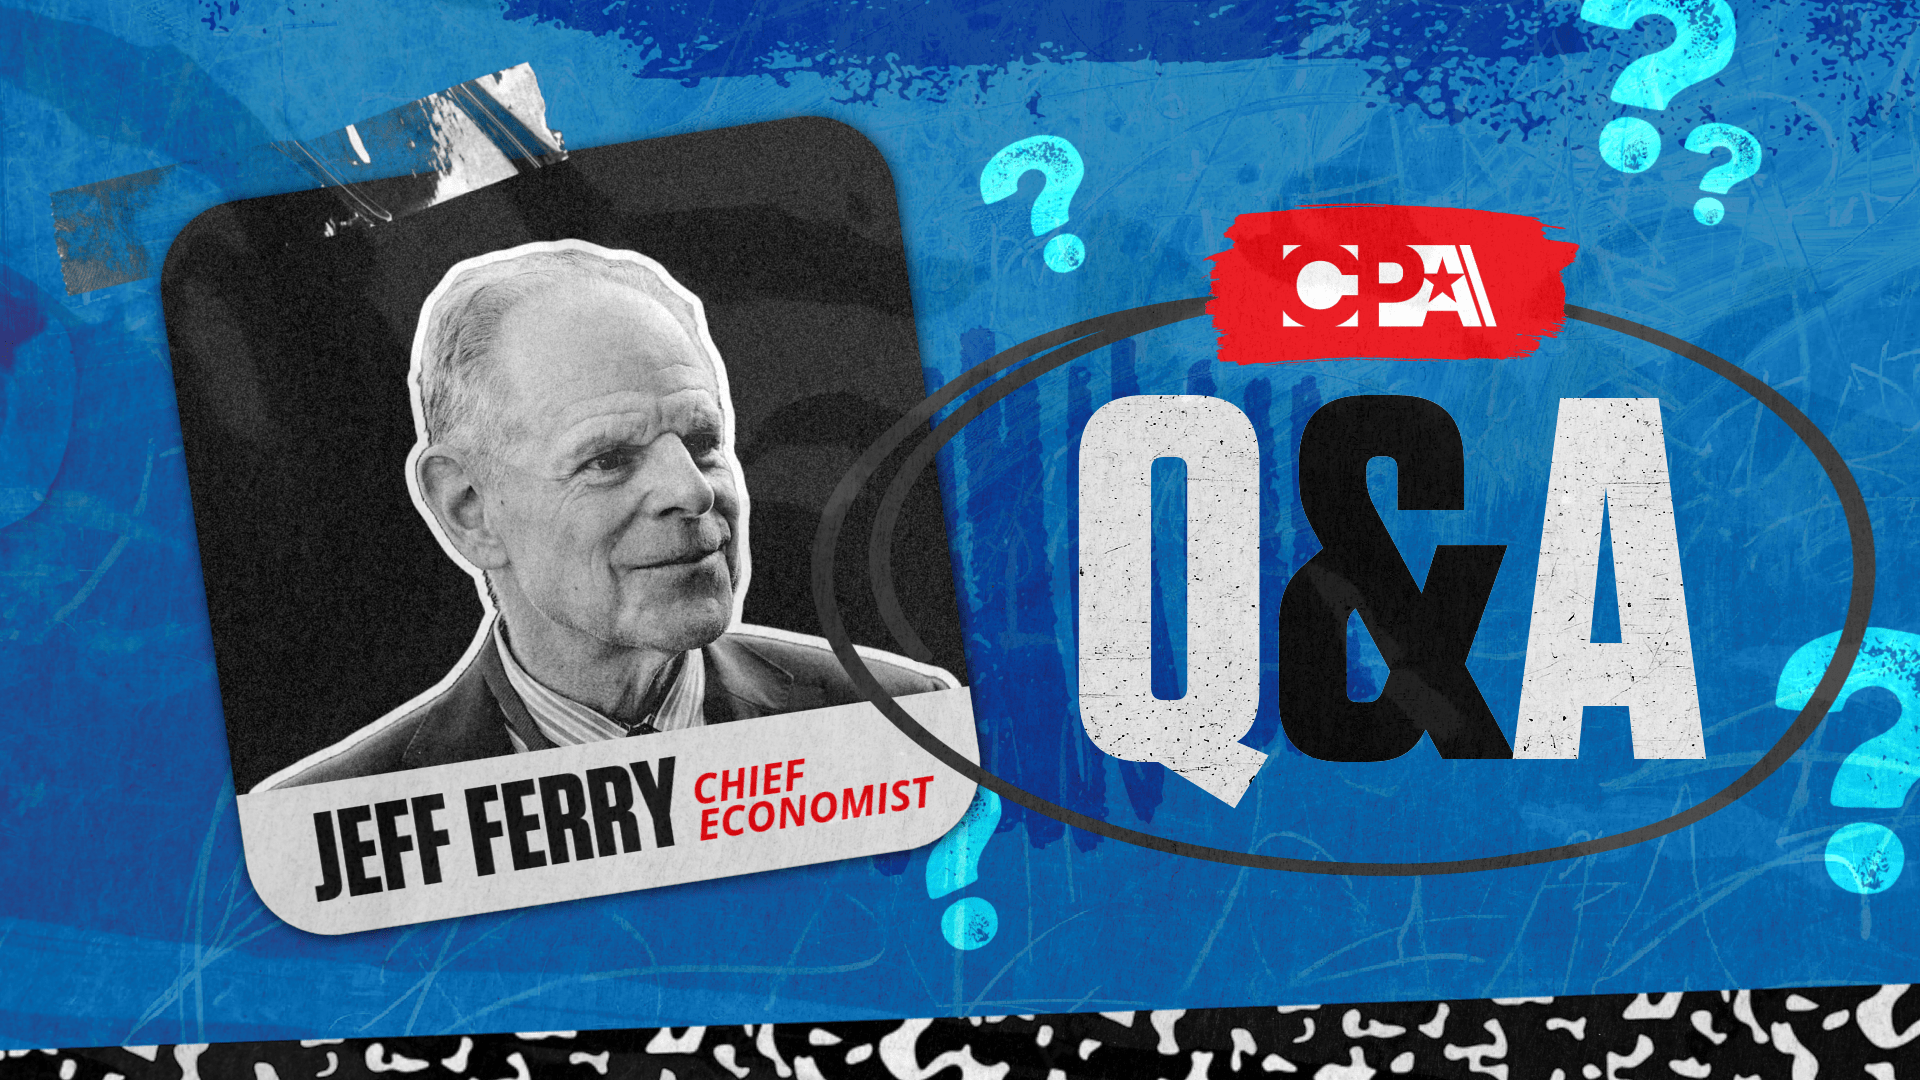 Trade Q&A with Jeff Ferry